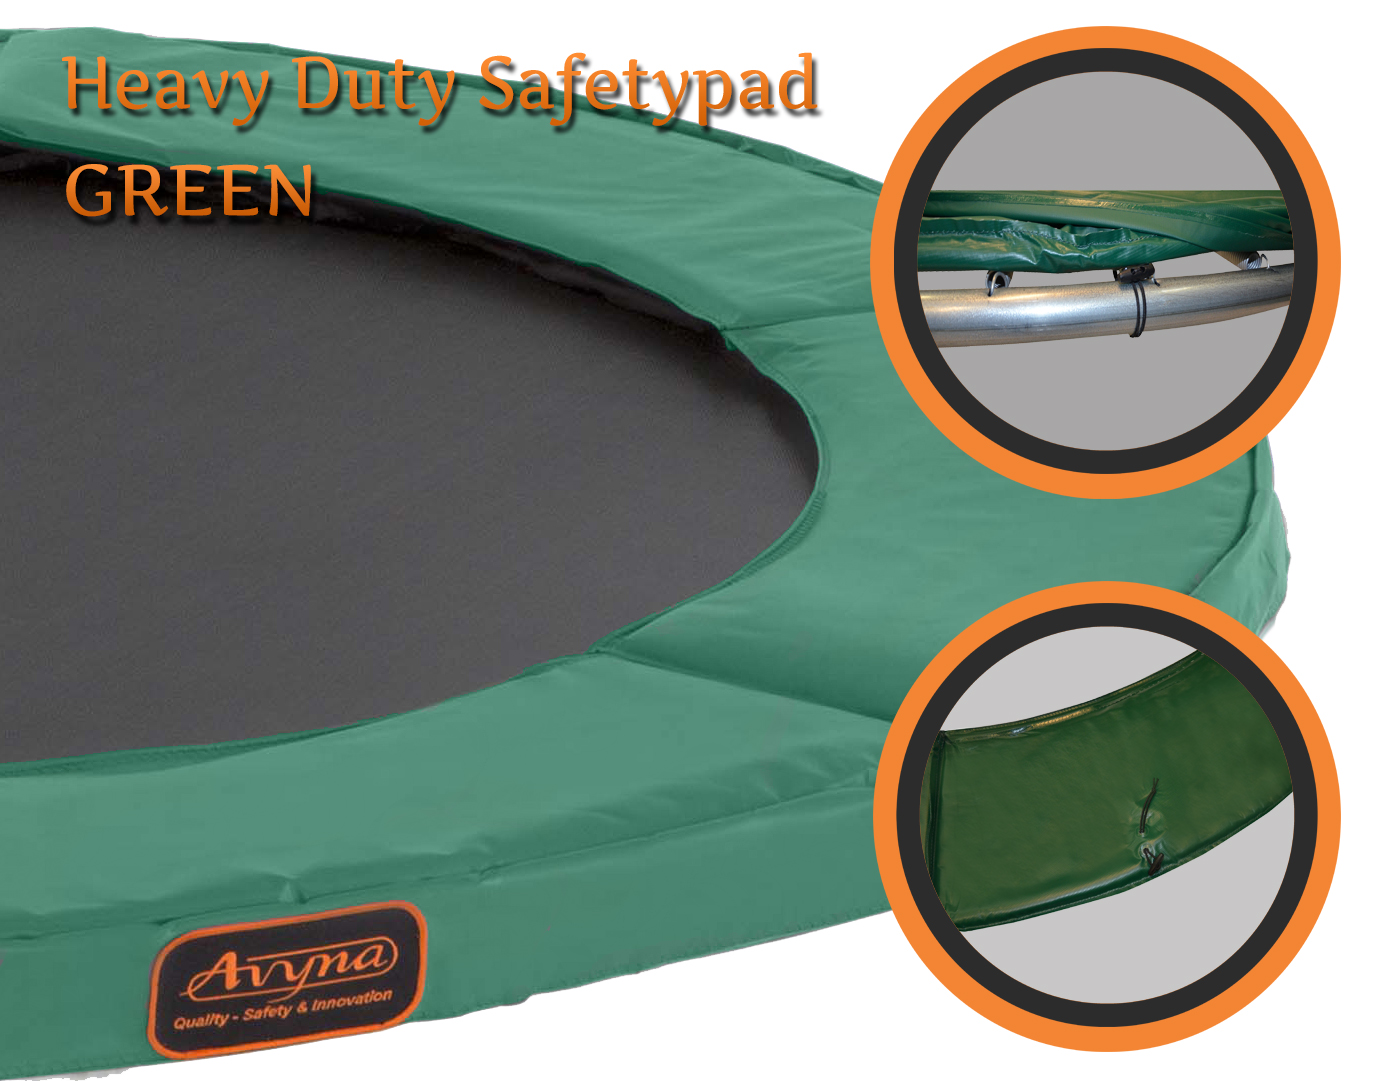 Universal Safety Pad 09ft Heavy Duty Green